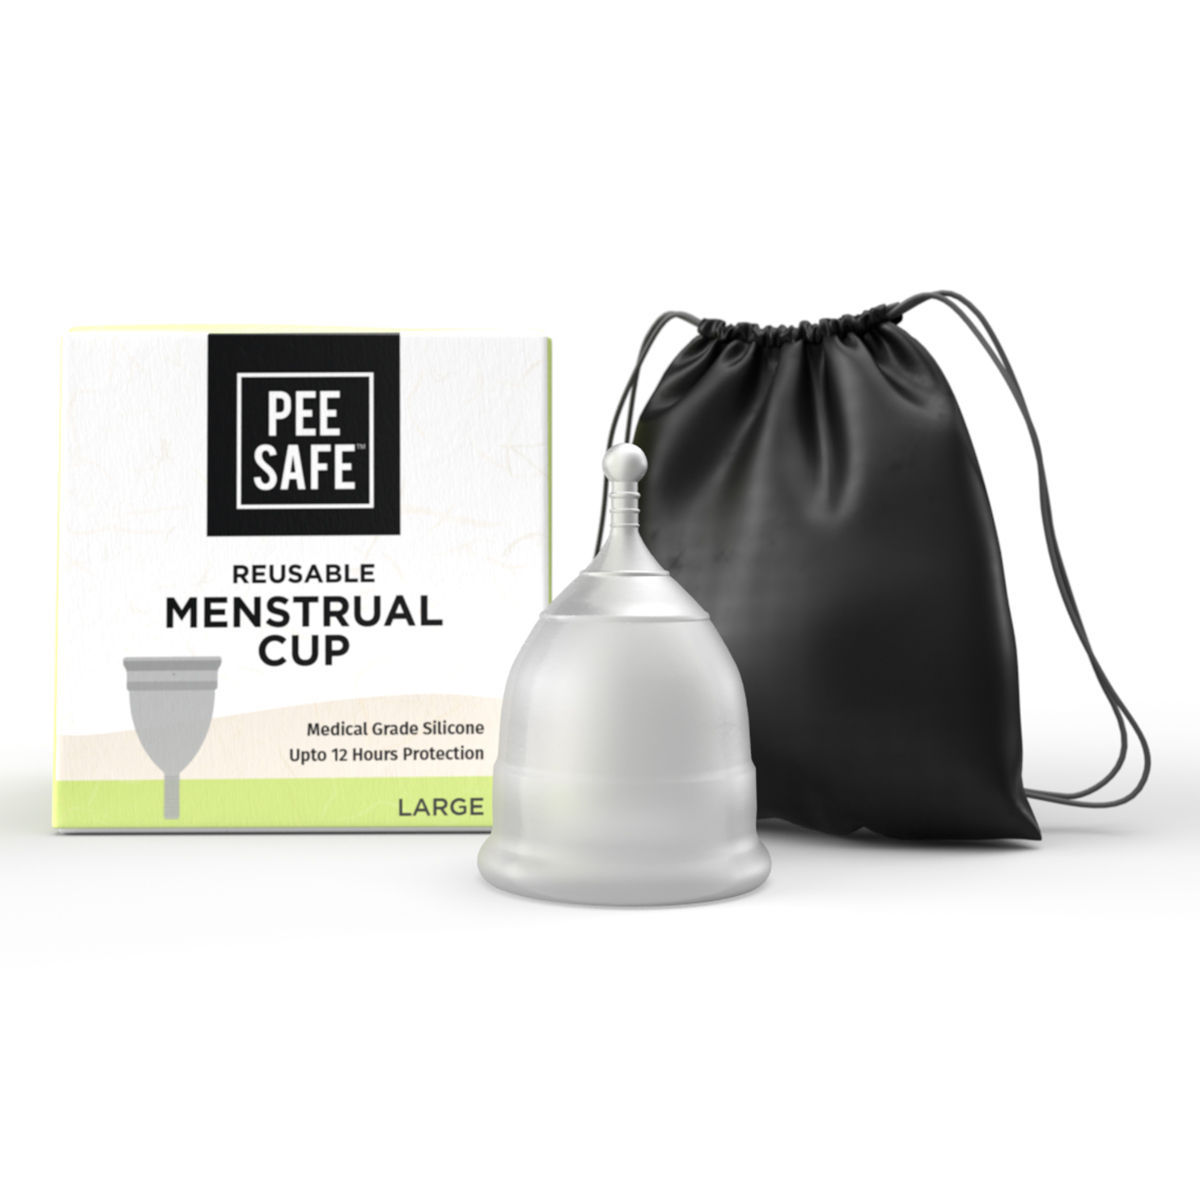 Pee Safe Reusable Menstrual Cup Large, 1 Count Price, Uses, Side